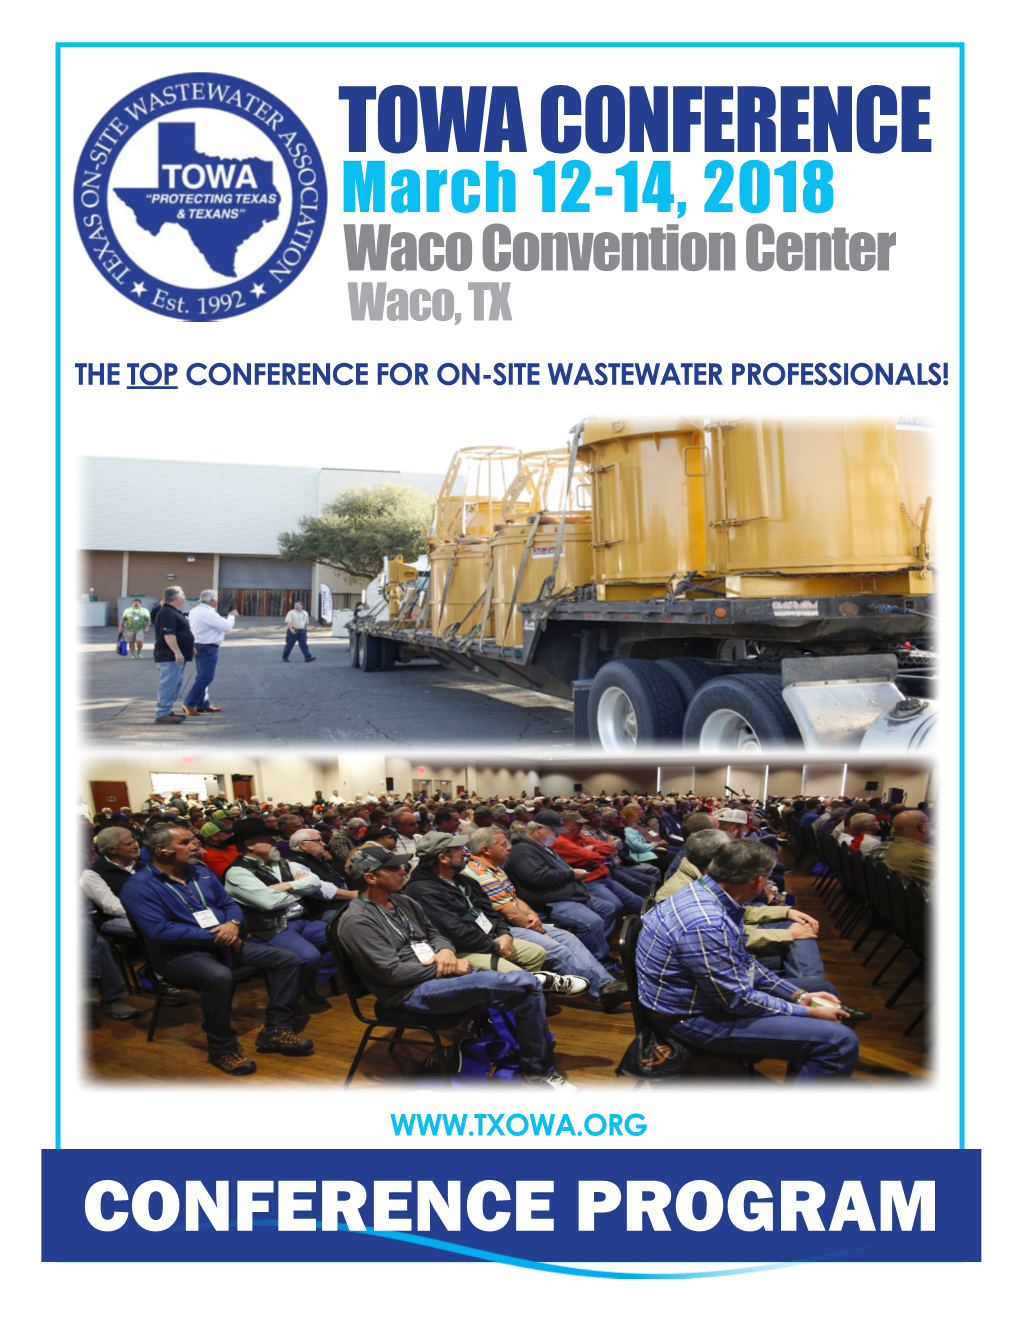 TOWA CONFERENCE March 12-14, 2018 Waco Convention Center Waco, TX the Top Conference for On-Site Wastewater Professionals!